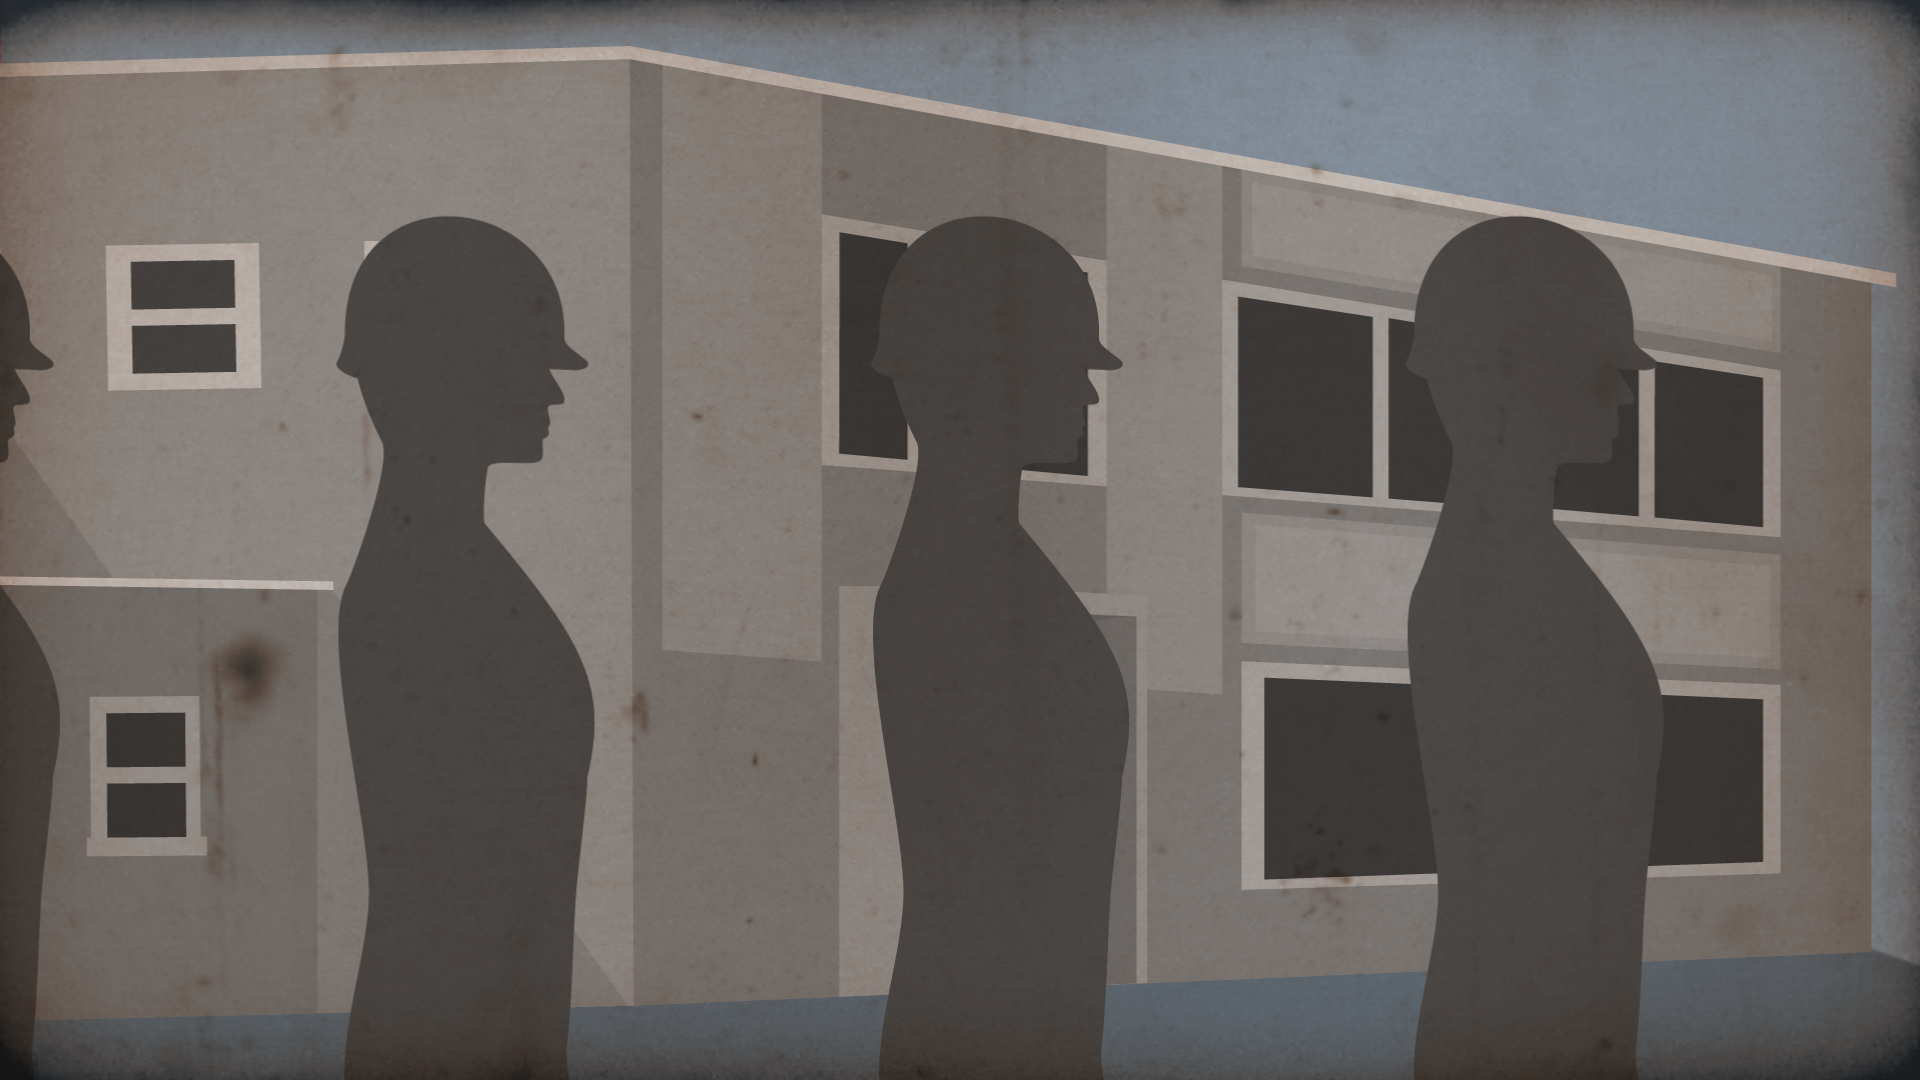 Screenshot of an animated intro to Dr. Strangelove. People only depicted as silhouettes, but now with helmets, march from the left to the right. The background shows a building inside an army base. The image has a blue background and some film grain on top of it.